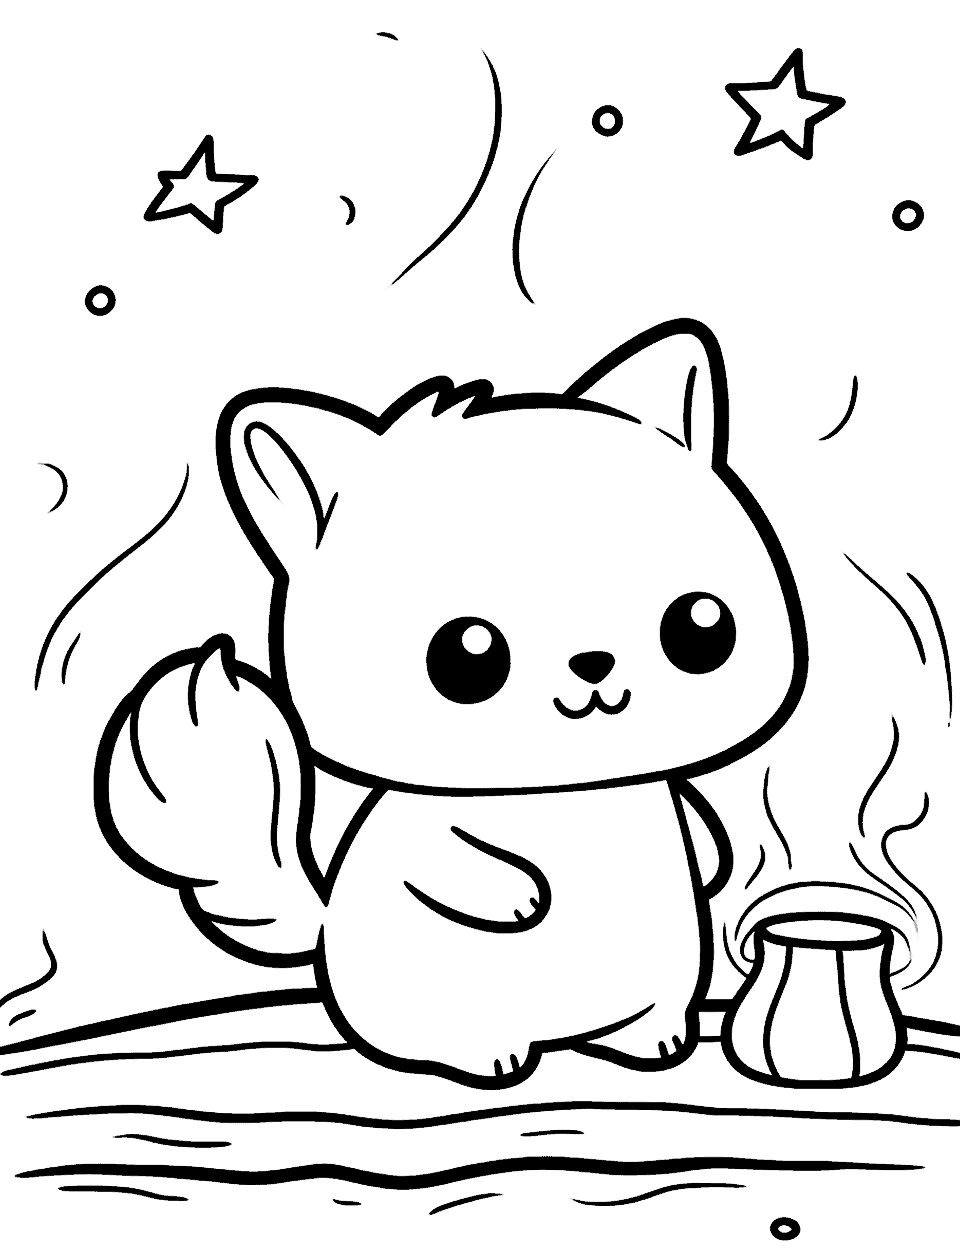 Fox's Starry Night  Kawaii Coloring Page - A Kawaii fox having a fun time under the starry sky.